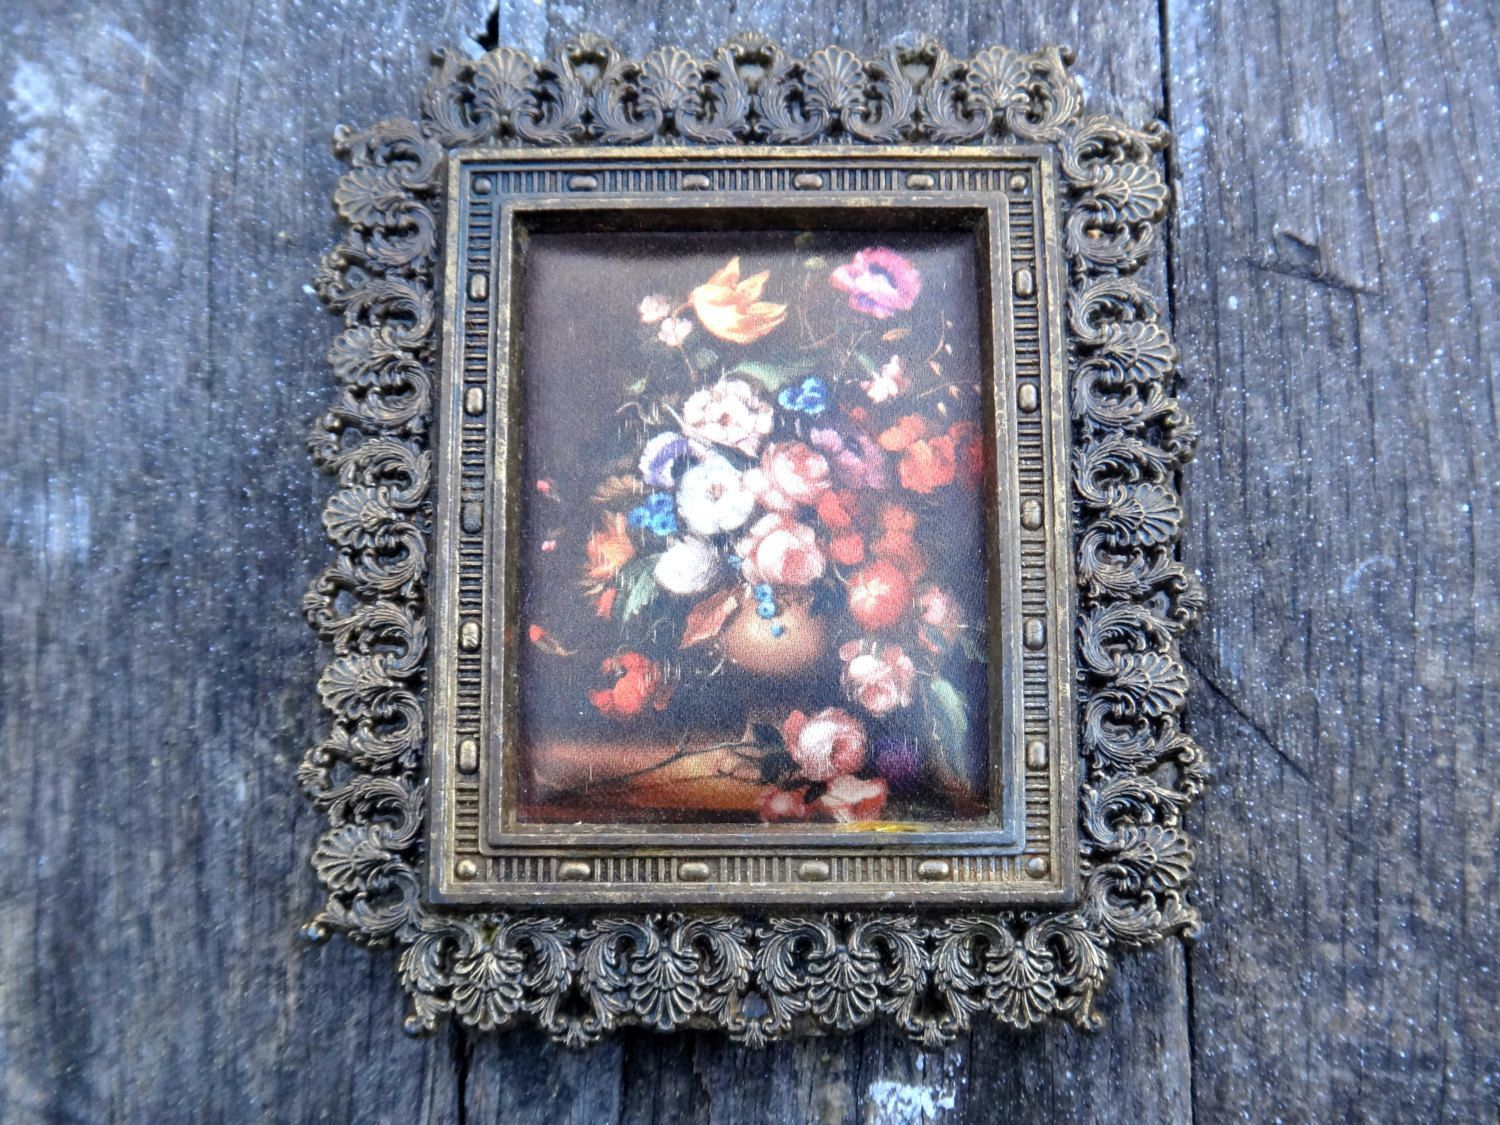 Vintage Brass Italian Picture Frame, Floral Print Fabric Pertaining To Most Recent Italy Framed Art Prints (View 6 of 20)